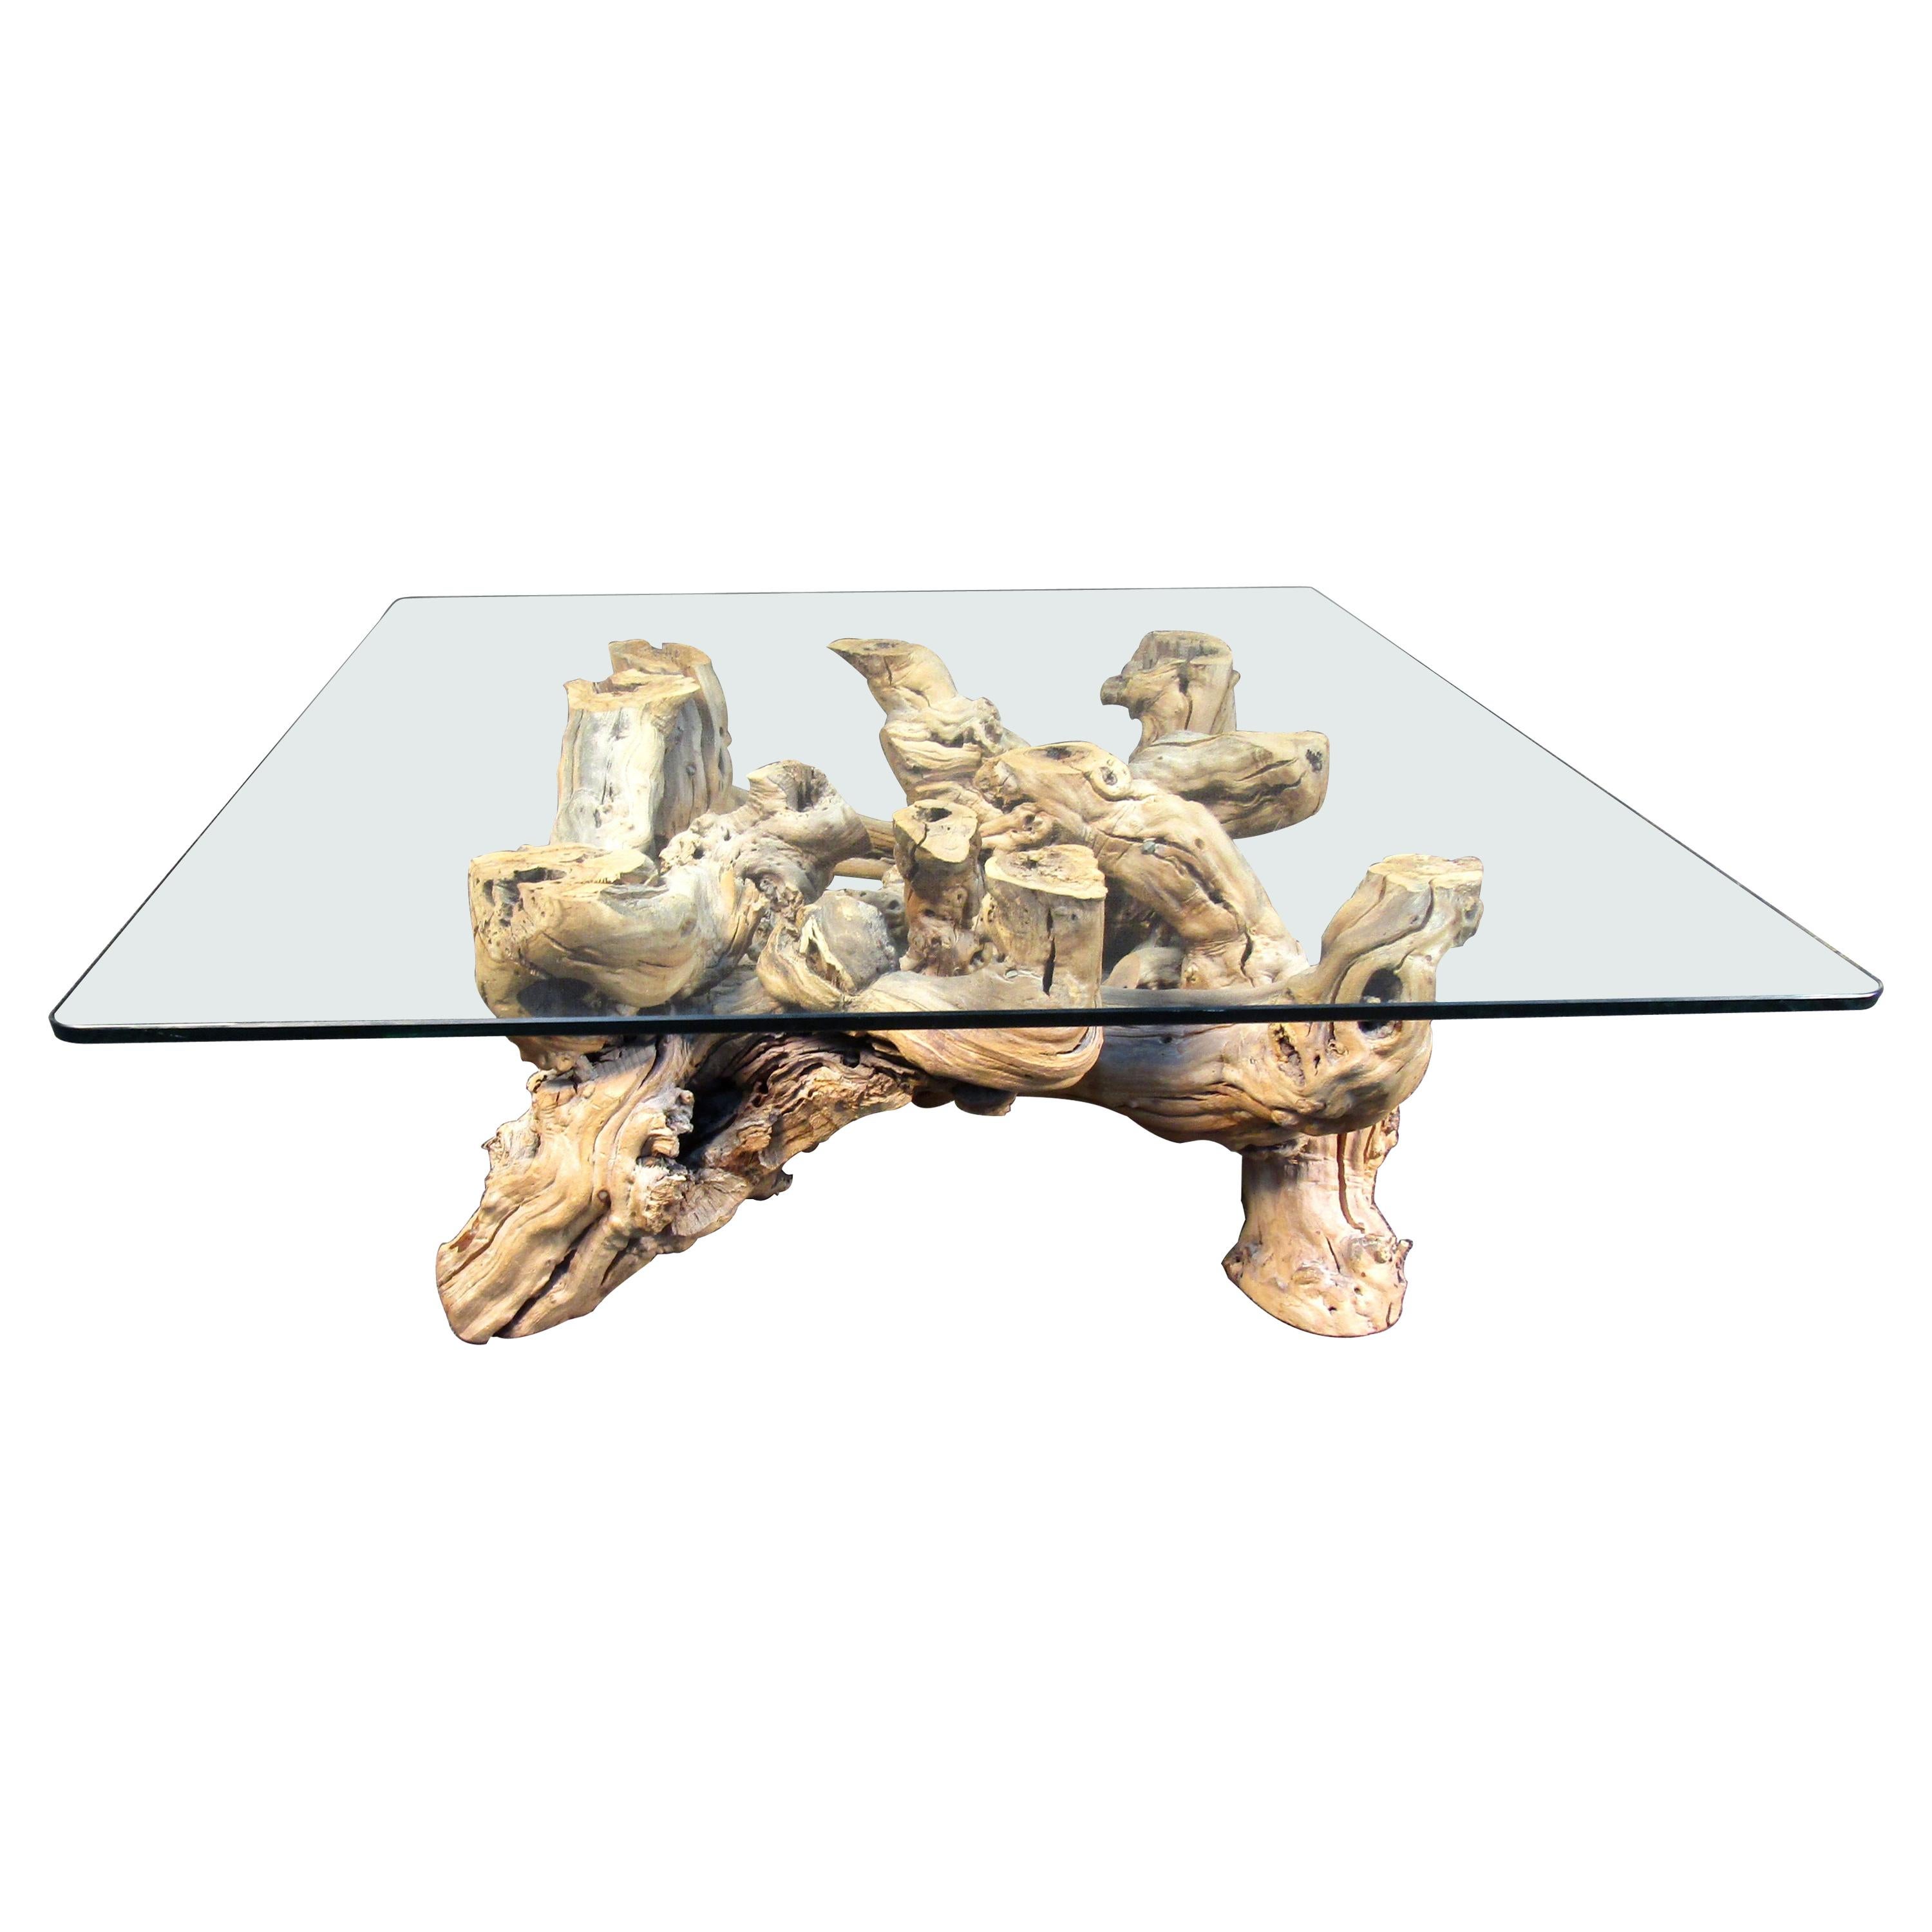 Vintage Glass-Topped Driftwood Coffee Table